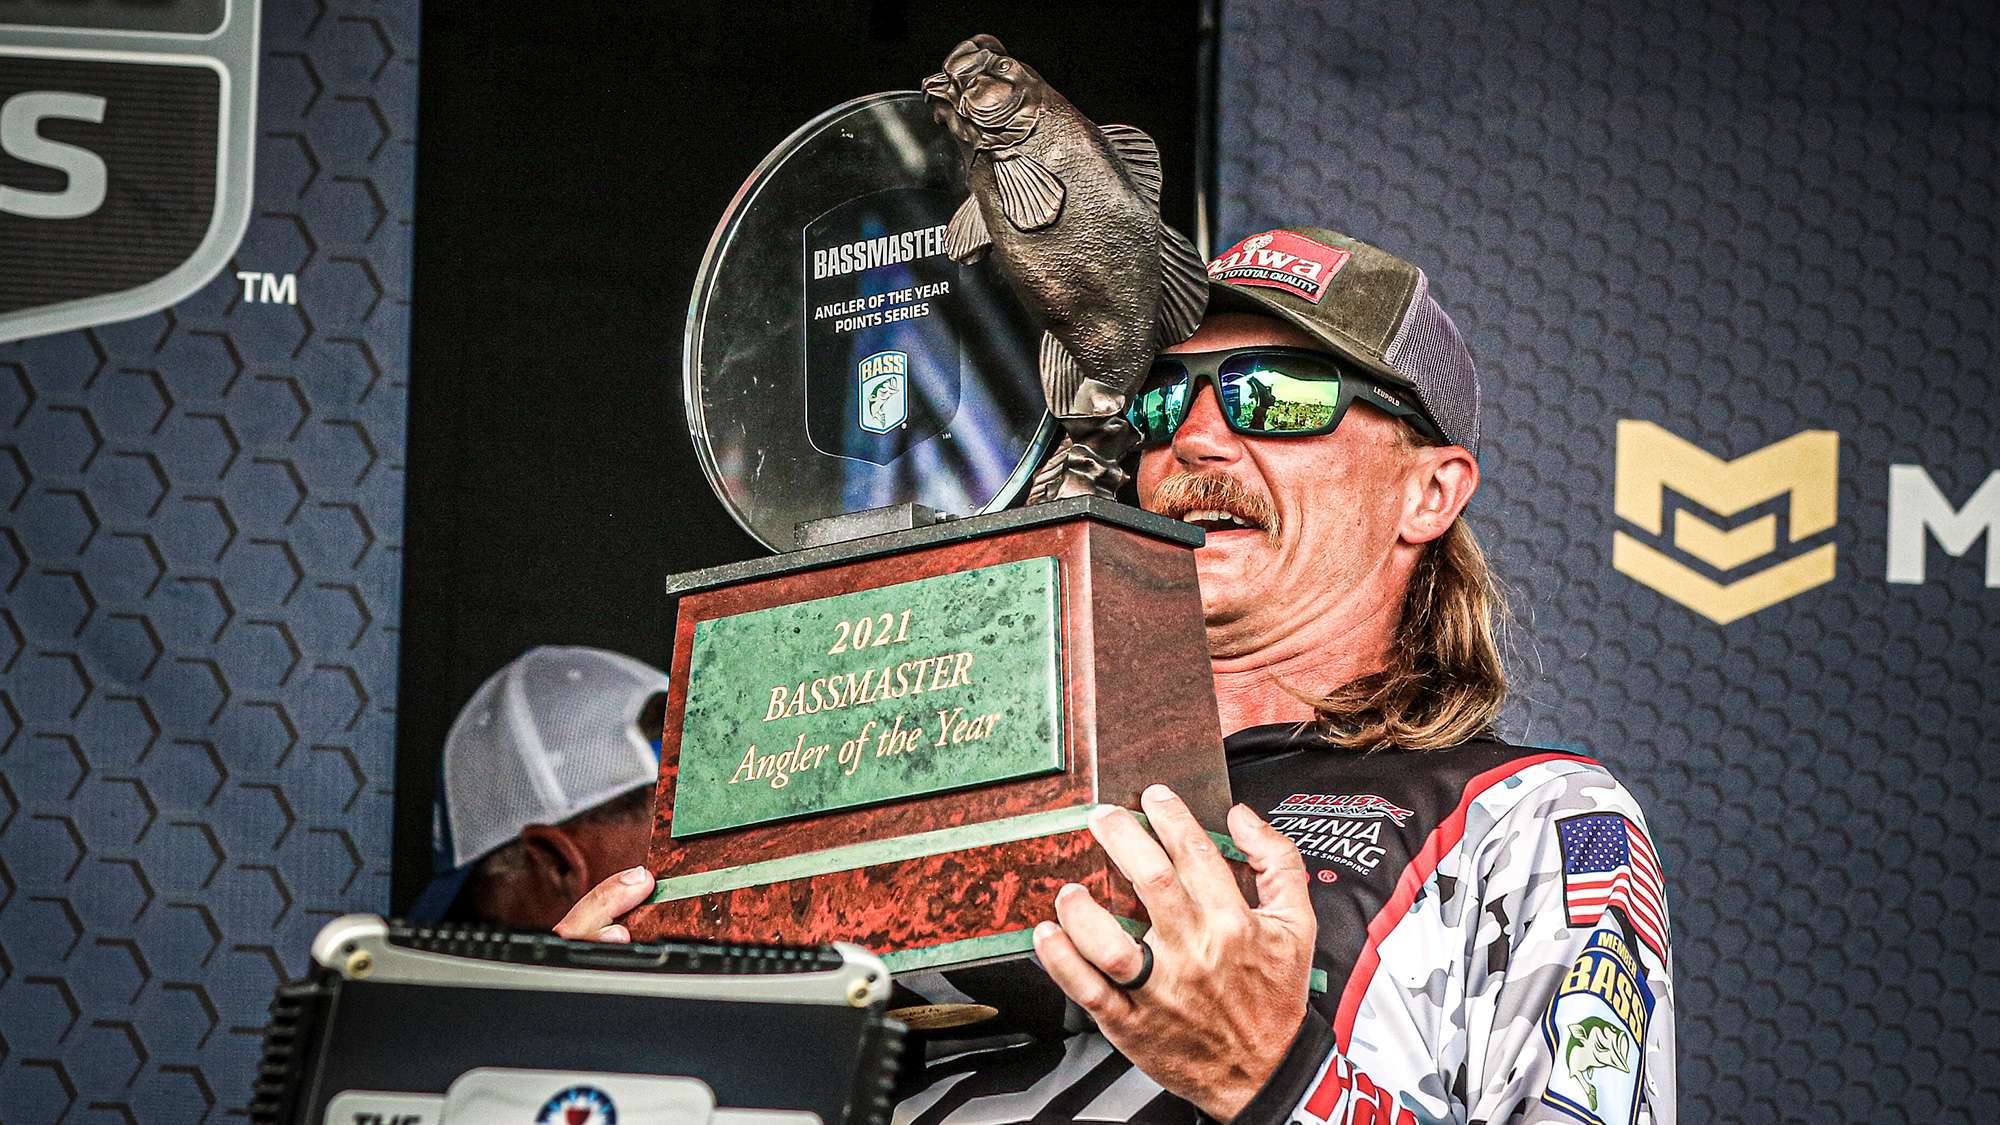 

<h4>Seth Feider (4-1)</h4>
<p><b>New Market, Minn. </b><br />
The reigning Bassmaster Angler of the Year is fishing his fifth career Classic — and he’s coming in hot, having finished in the Top 30 of 11 straight tournaments to finish 2021. In two trips to Hartwell, Feider finished a respectable 18th at the 2018 Classic and 24th at the 2019 Bassmaster Elite. His highest Classic finish was fourth in 2020 at Guntersville. Remember how this guy fished all last season with the AOY pressure mounting at every event? Well, there are no points on the line at this event — and he’s fishing on house money with an AOY trophy already on the mantle. A relaxed Feider is a solid bet anywhere in the world.<br />
” class=”wp-image-567928″ width=”2000″ height=”1125″/><figcaption>
<h4>Seth Feider (4-1)</h4>
<p><b>New Market, Minn. </b><br />
The reigning Bassmaster Angler of the Year is fishing his fifth career Classic — and he’s coming in hot, having finished in the Top 30 of 11 straight tournaments to finish 2021. In two trips to Hartwell, Feider finished a respectable 18th at the 2018 Classic and 24th at the 2019 Bassmaster Elite. His highest Classic finish was fourth in 2020 at Guntersville. Remember how this guy fished all last season with the AOY pressure mounting at every event? Well, there are no points on the line at this event — and he’s fishing on house money with an AOY trophy already on the mantle. A relaxed Feider is a solid bet anywhere in the world.<br />
</figcaption></figure>
<div class=